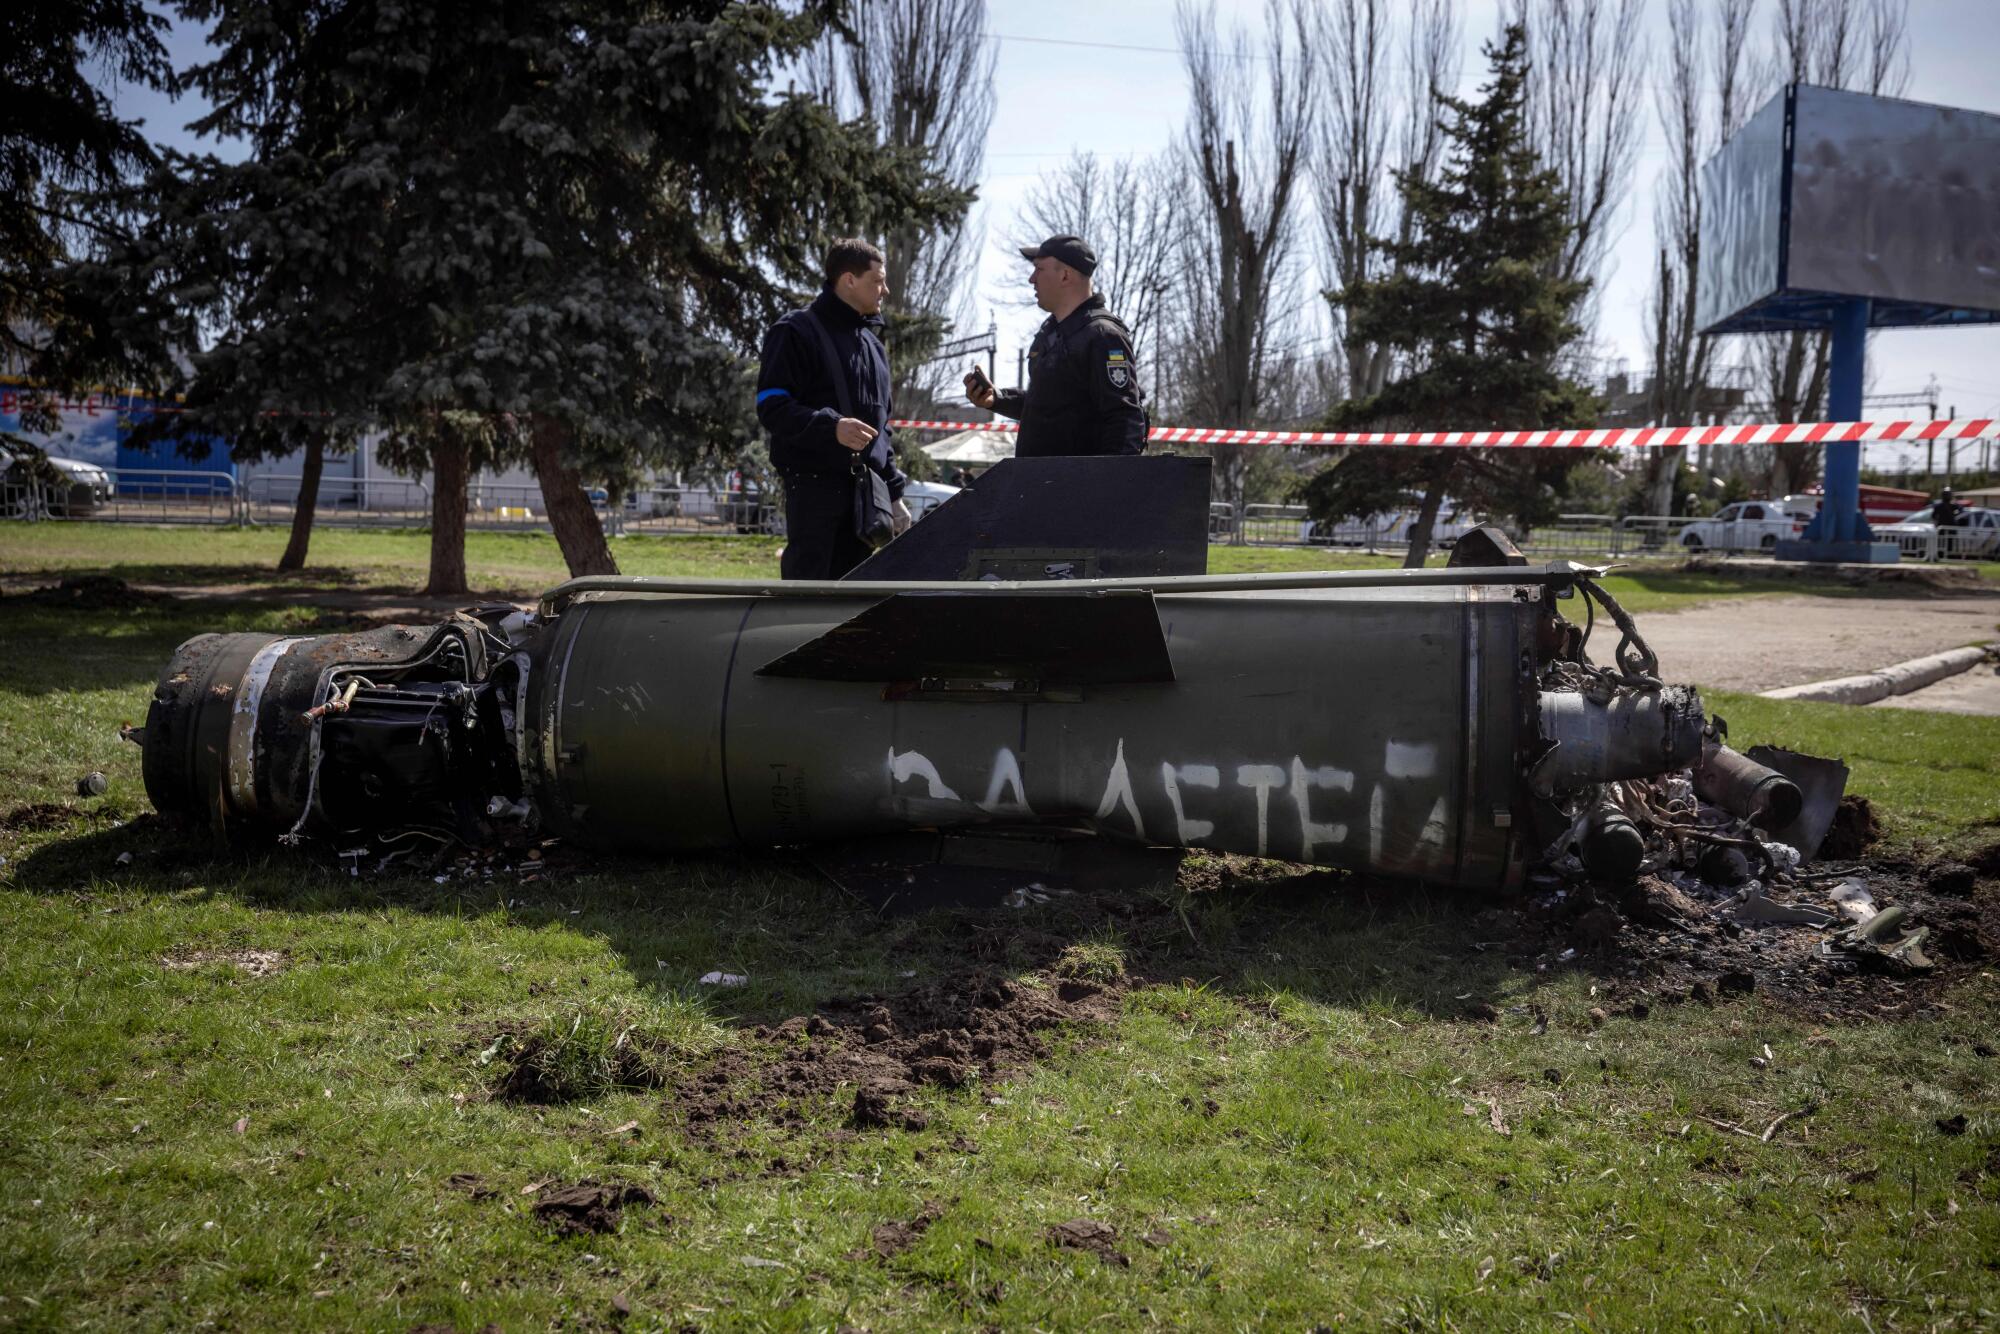 Ukrainian police inspect the remains of a large rocket with the words "for our children" in Russian